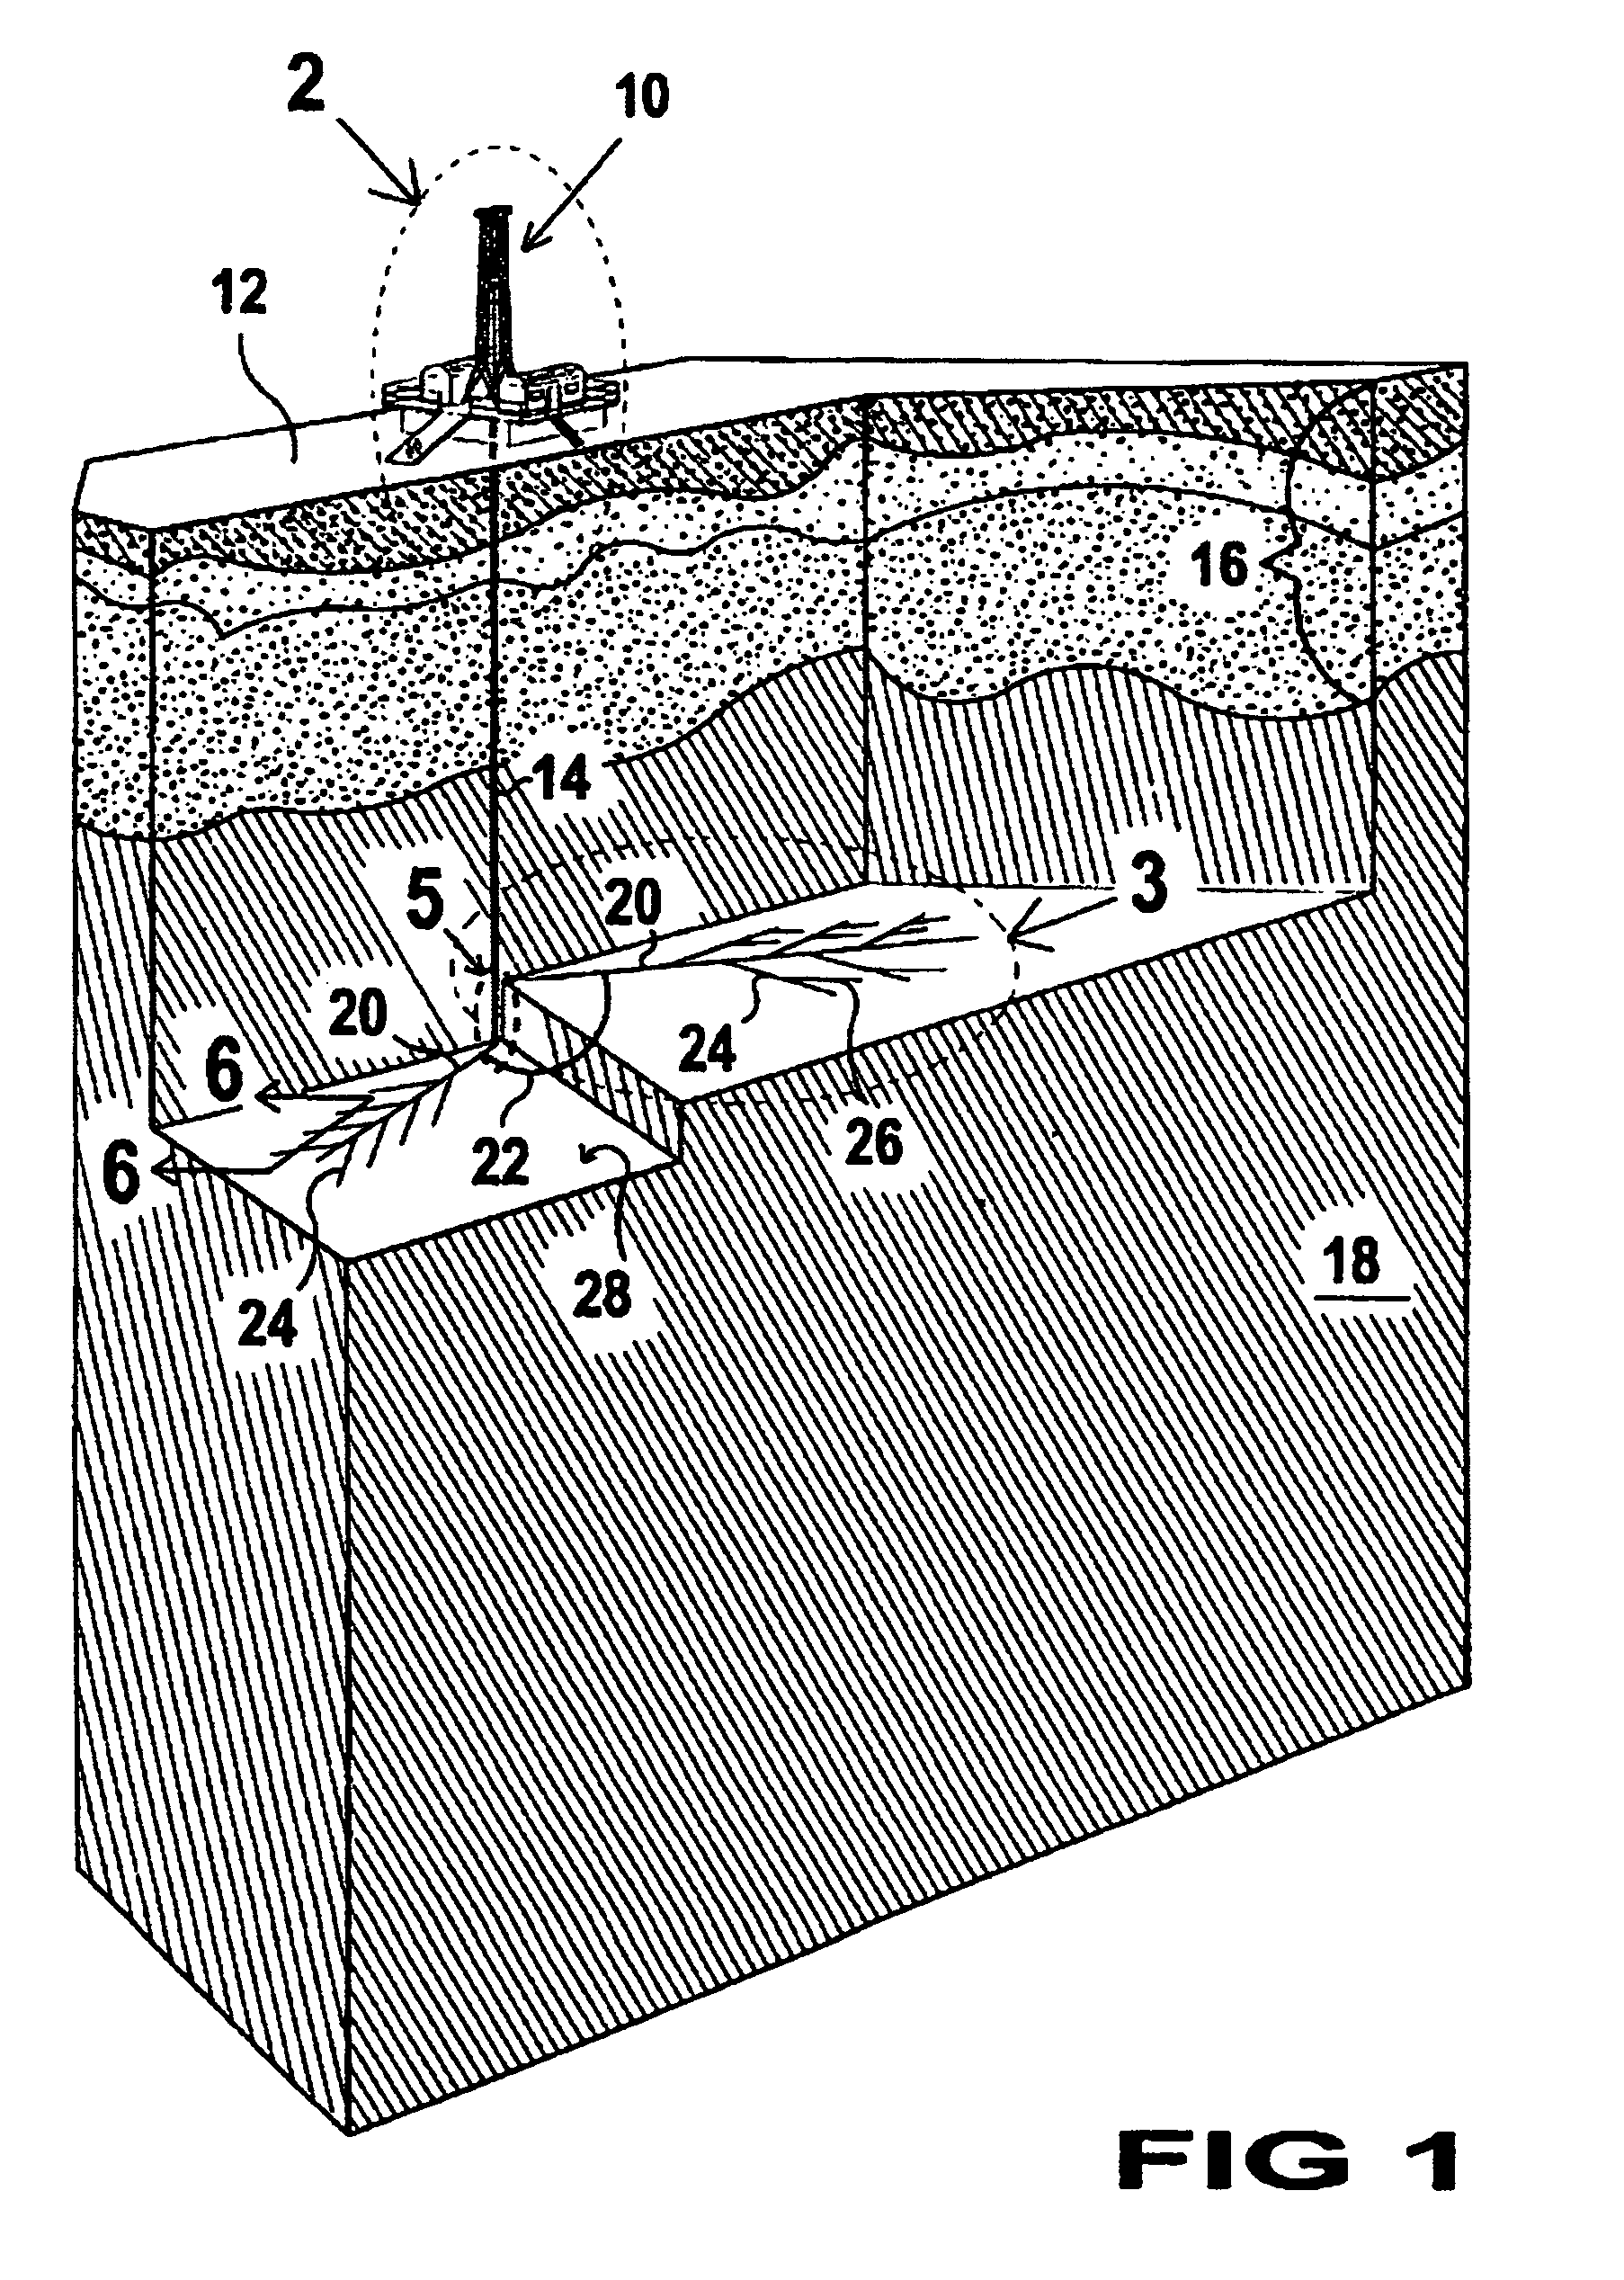 Method for temporary or permanent disposal of nuclear waste